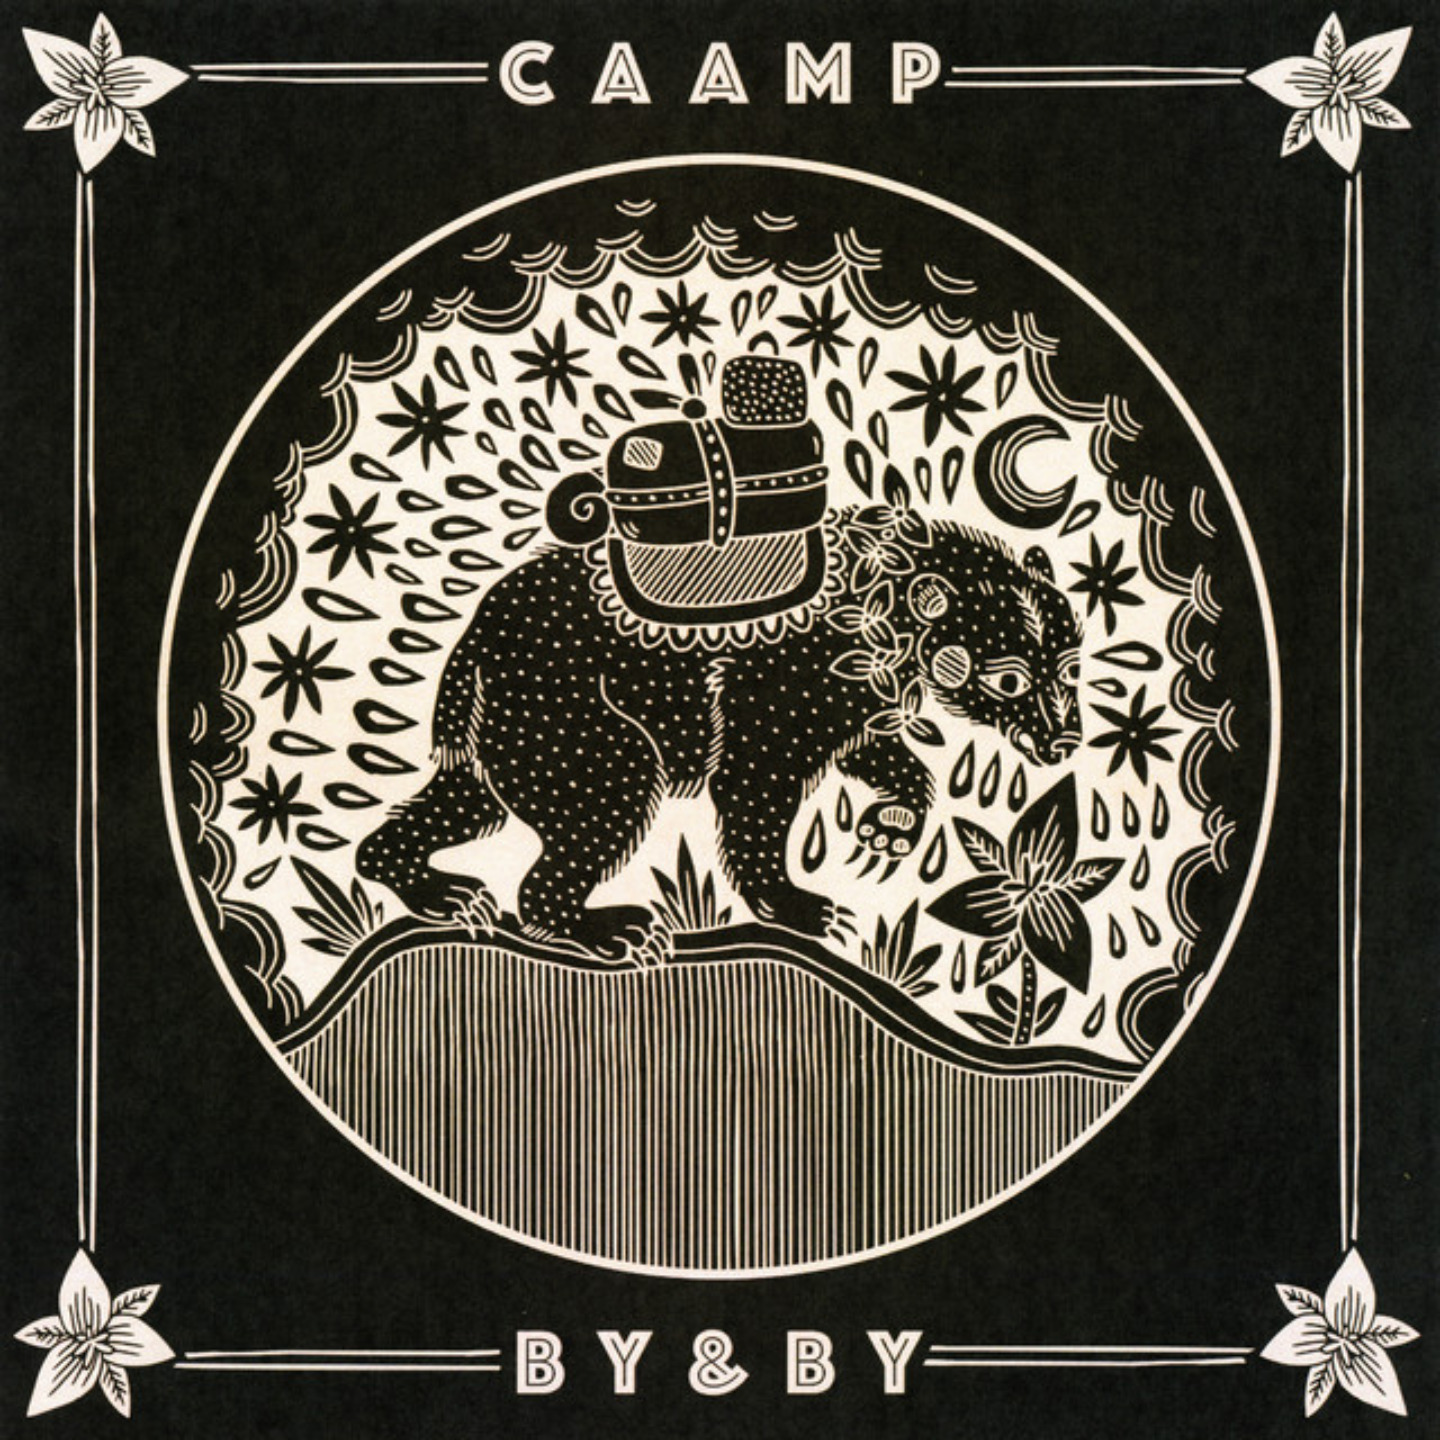 CAAMP - By & By 2xLP